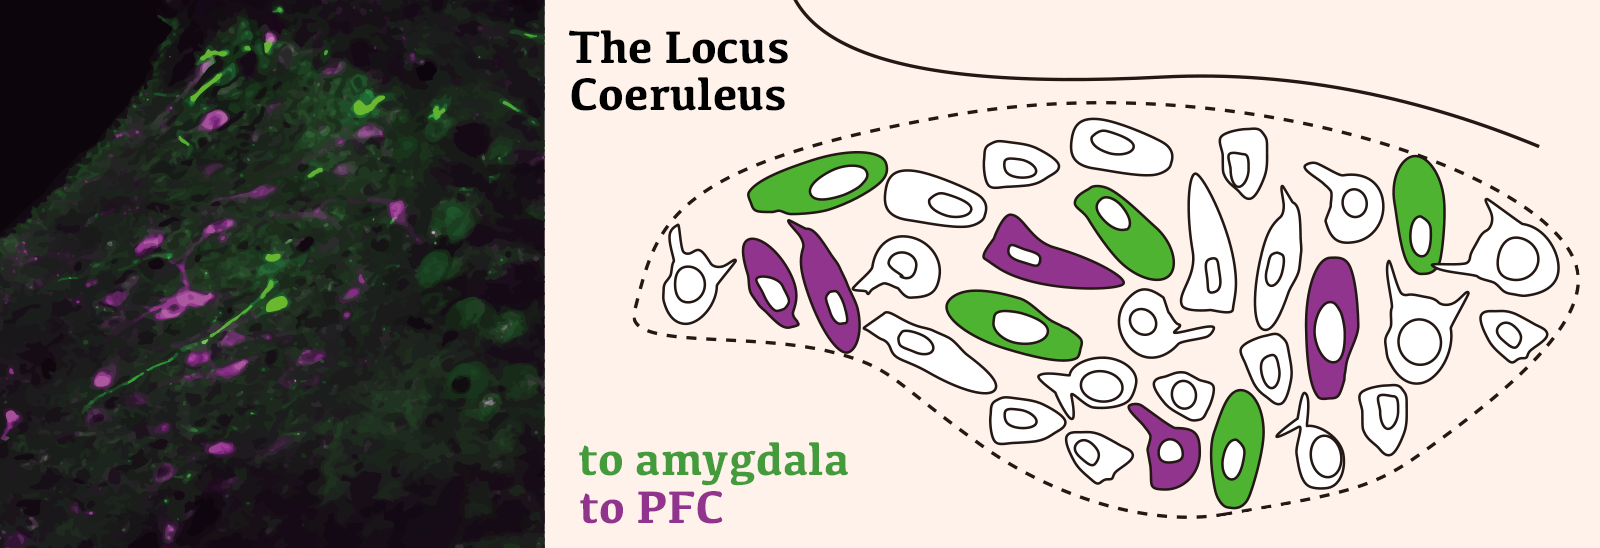 photo and schematic of amygdala and p-f-c projecting cells in the locus coeruleus